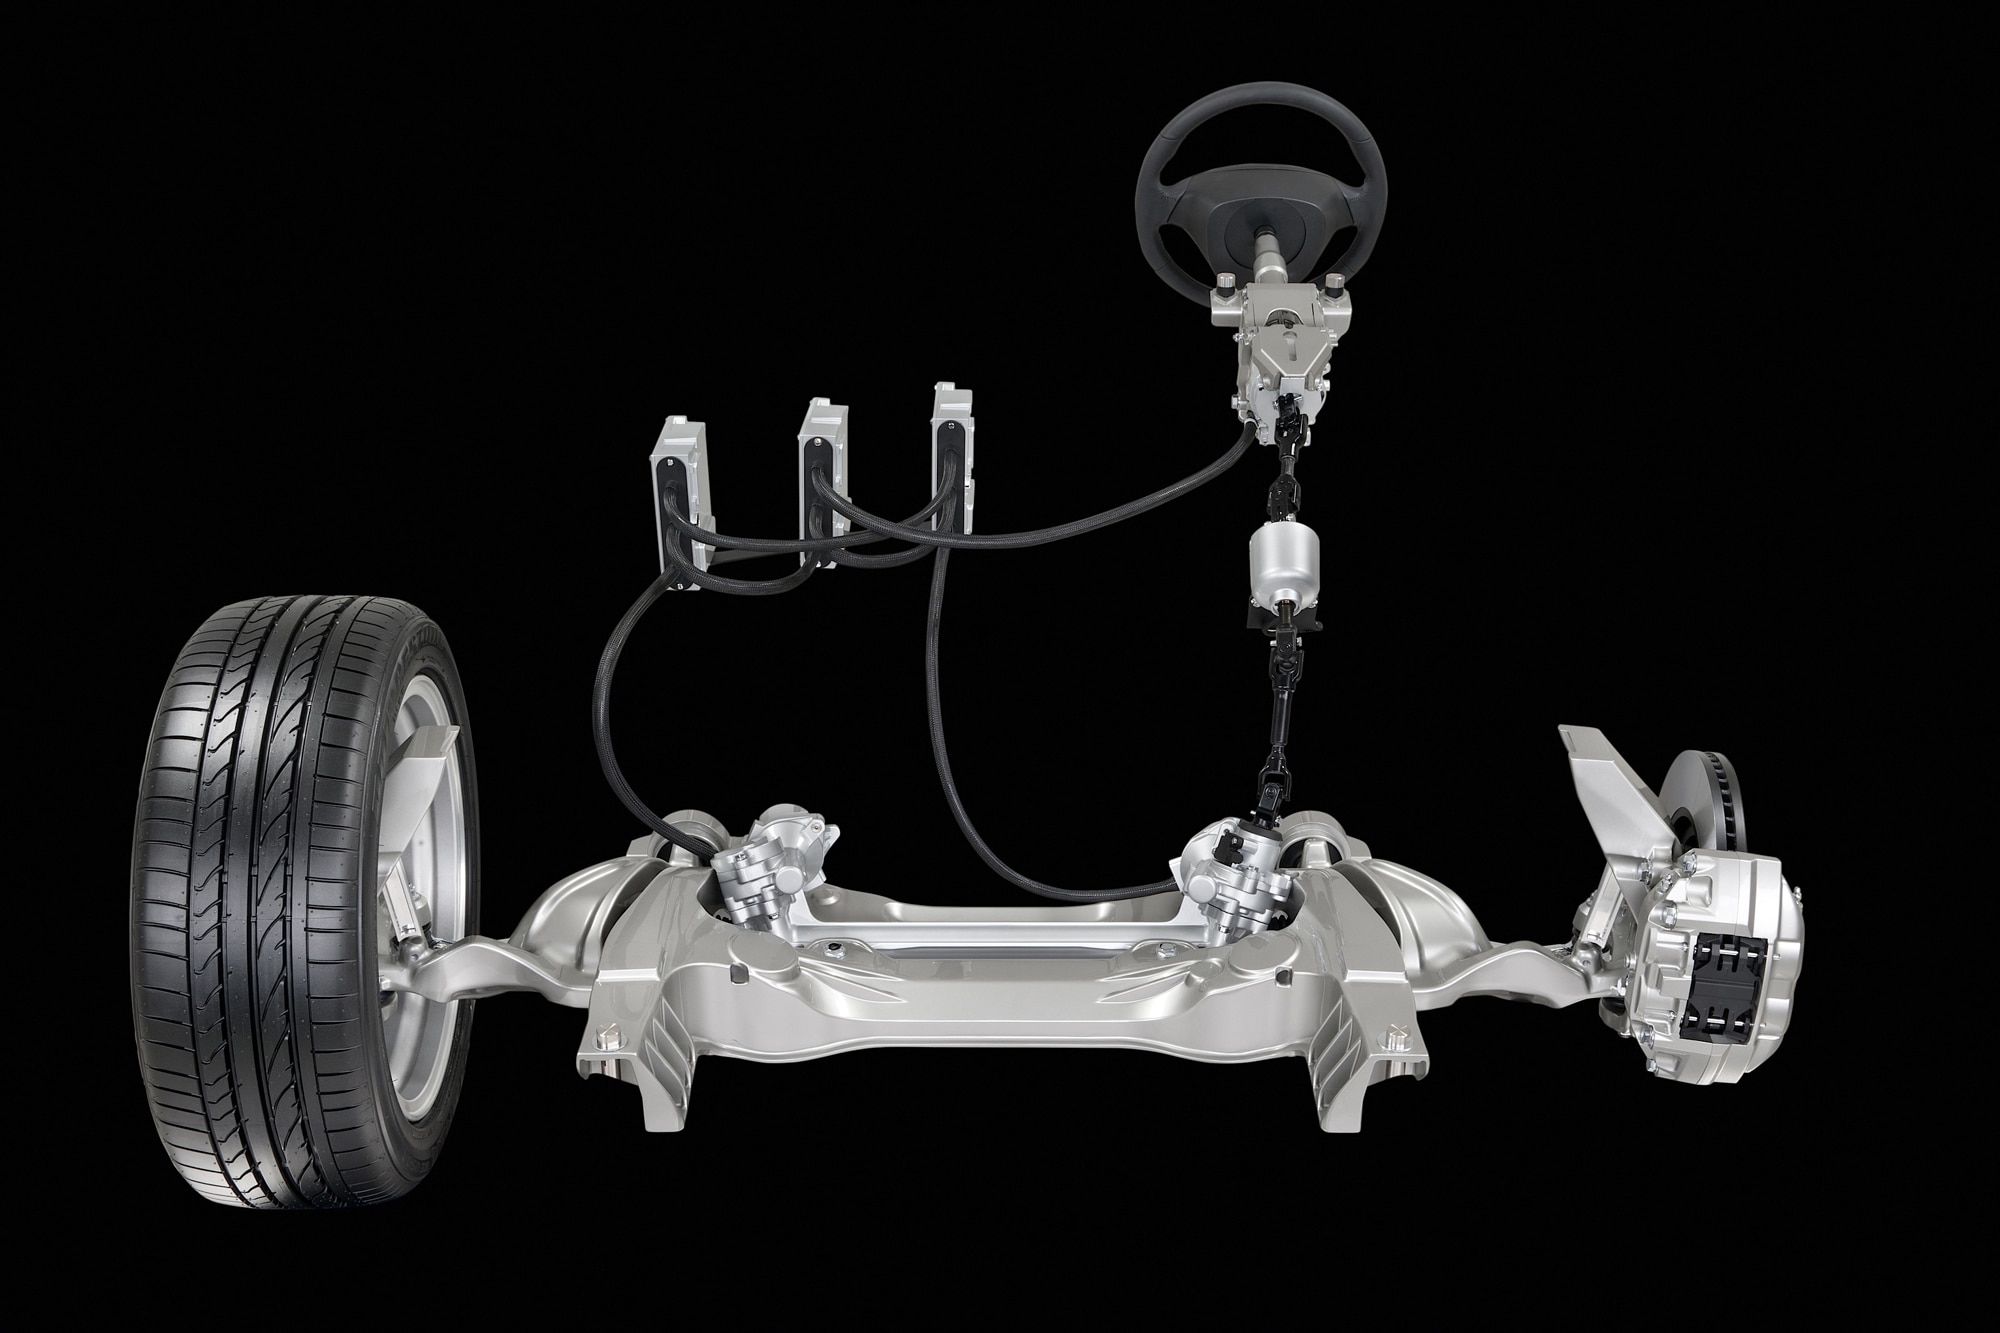 Infiniti showing steer-by-wire safety system